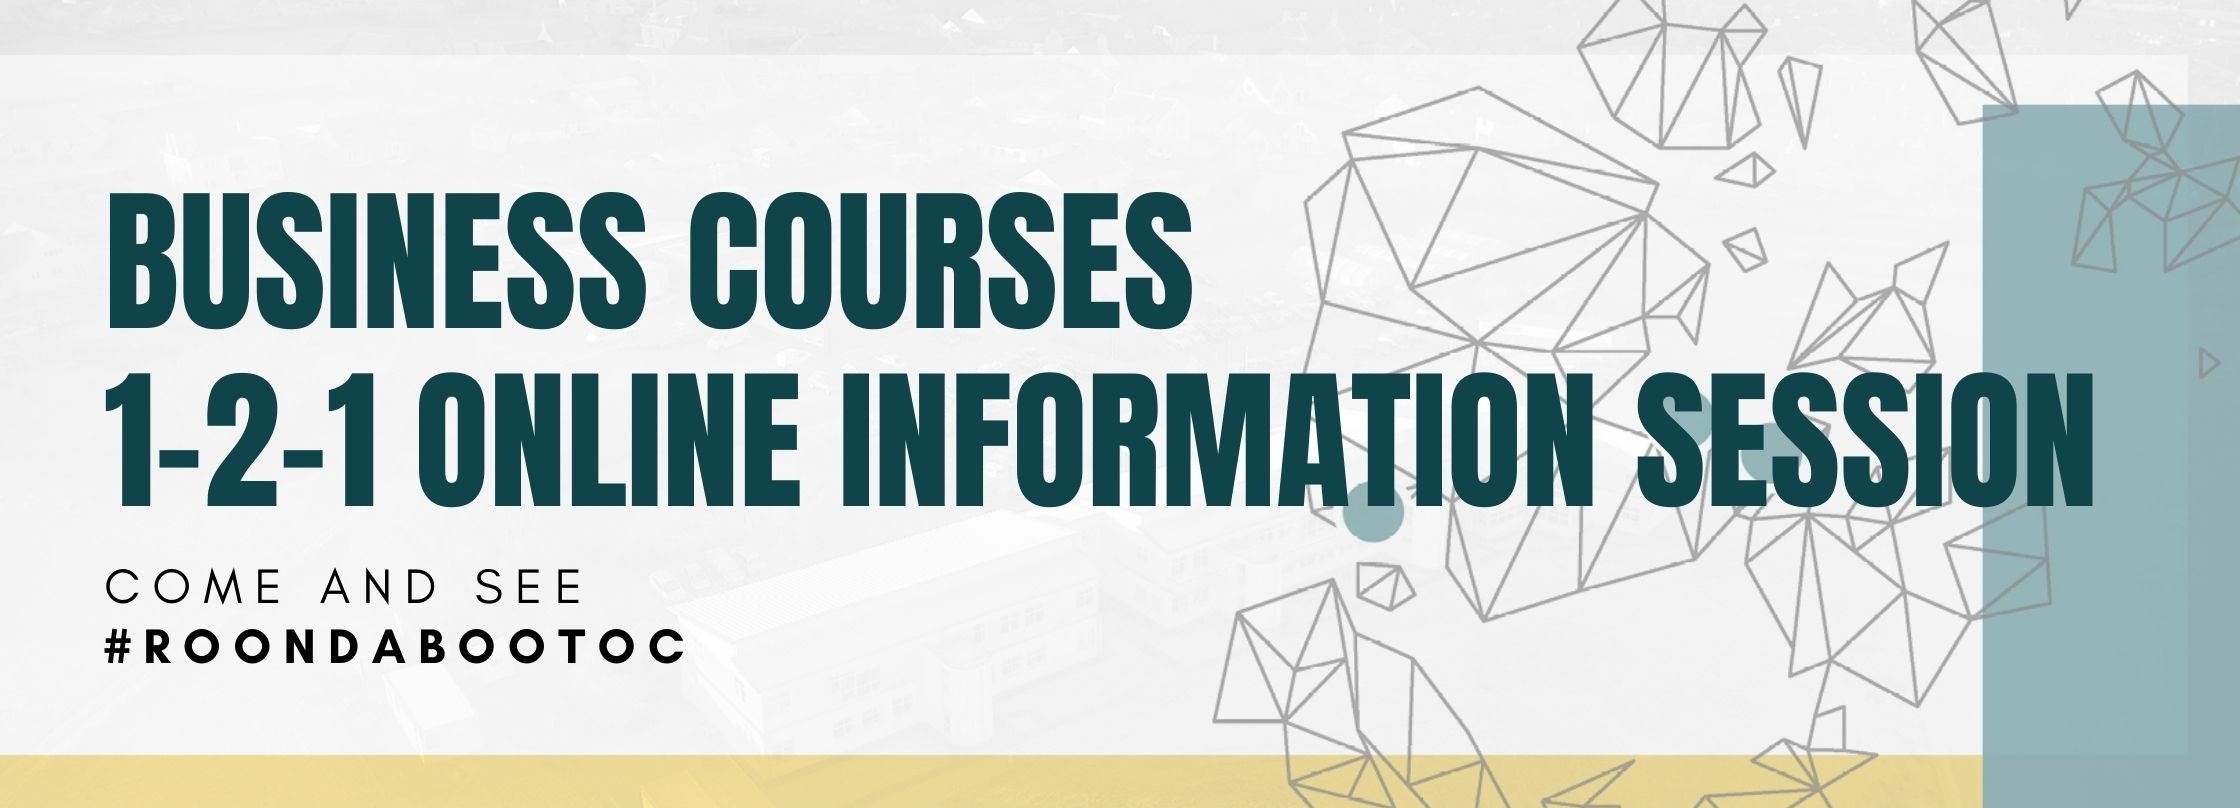 Business courses 1-2-1 online information session | Come and see | roondabootoc